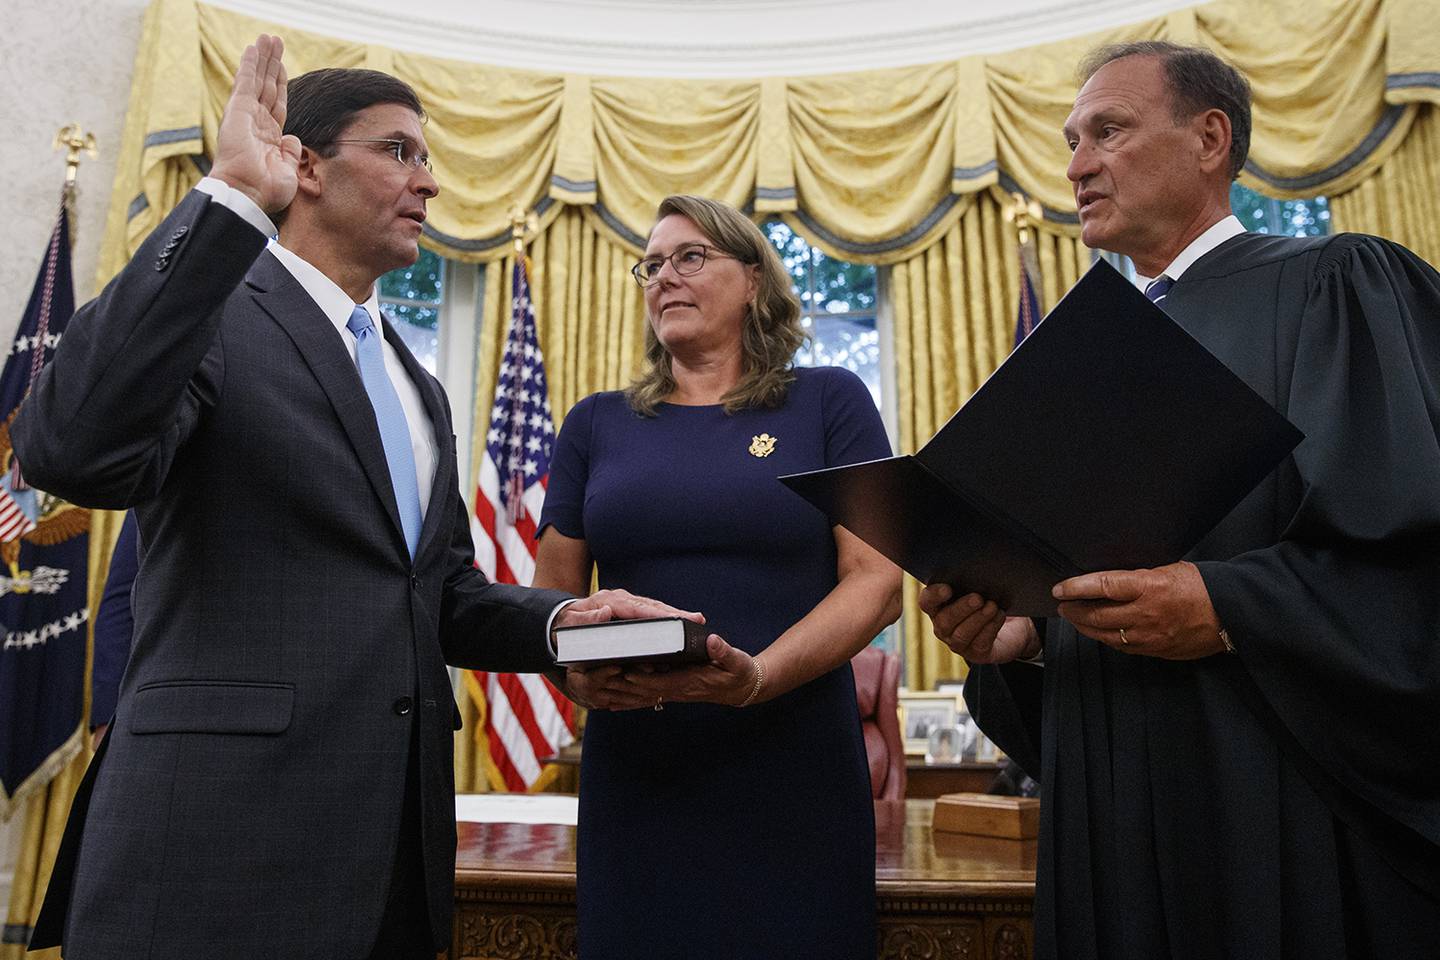 Mark Esper, left, is sworn in as the Secretary of Defense by Supreme Court Justice Samuel Alito, right, as his wife Leah Esper holds the Bible, during a ceremony with President Donald Trump in the Oval Office at the White House in Washington, Tuesday, July 23, 2019.